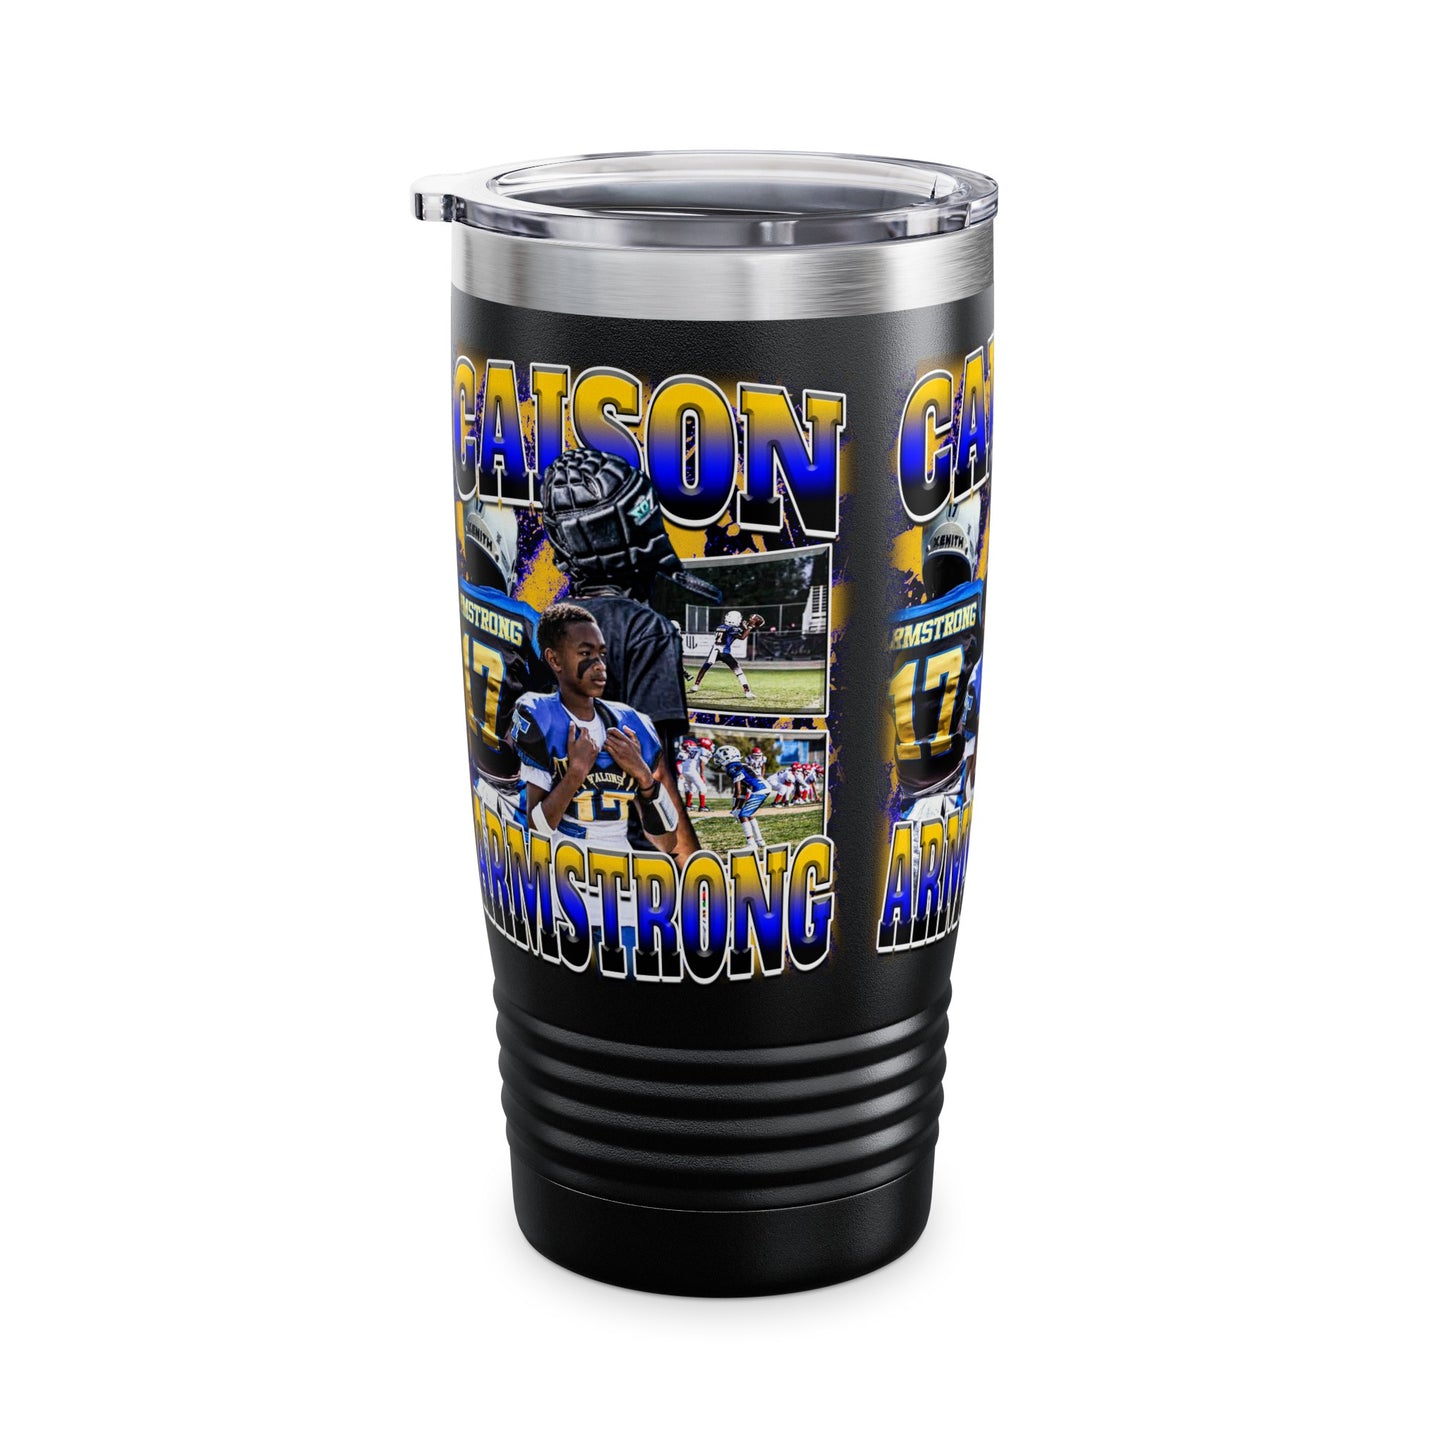 Caison Armstrong Stainless Steal Tumbler